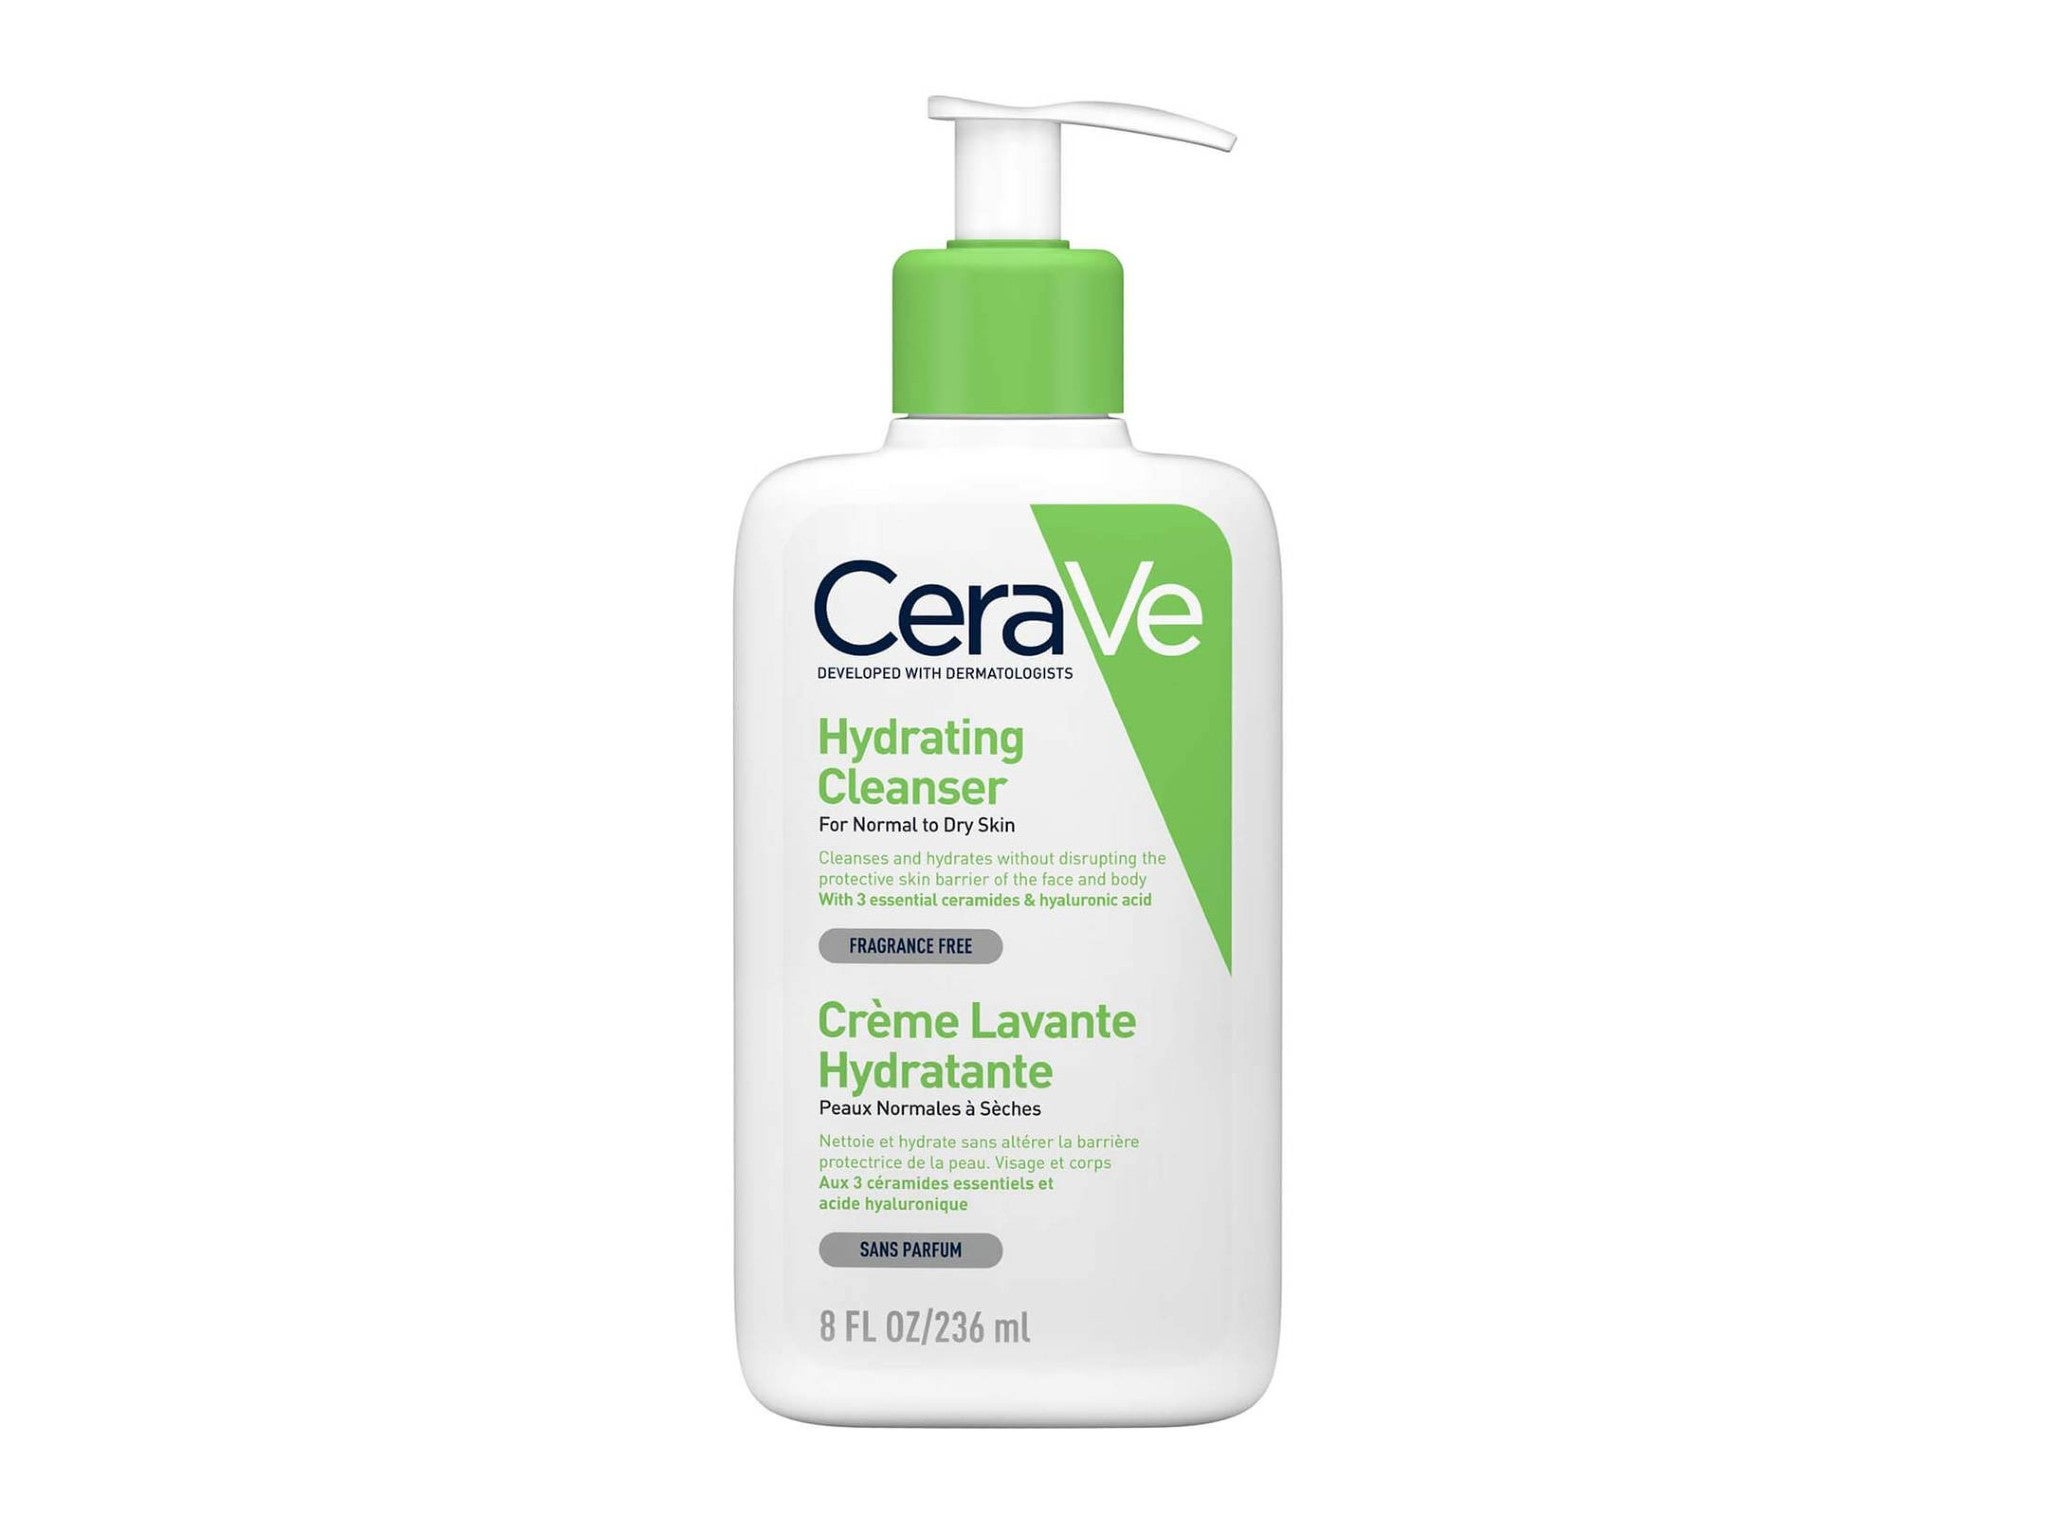 CeraVe hydrating cleanser indybest.jpg